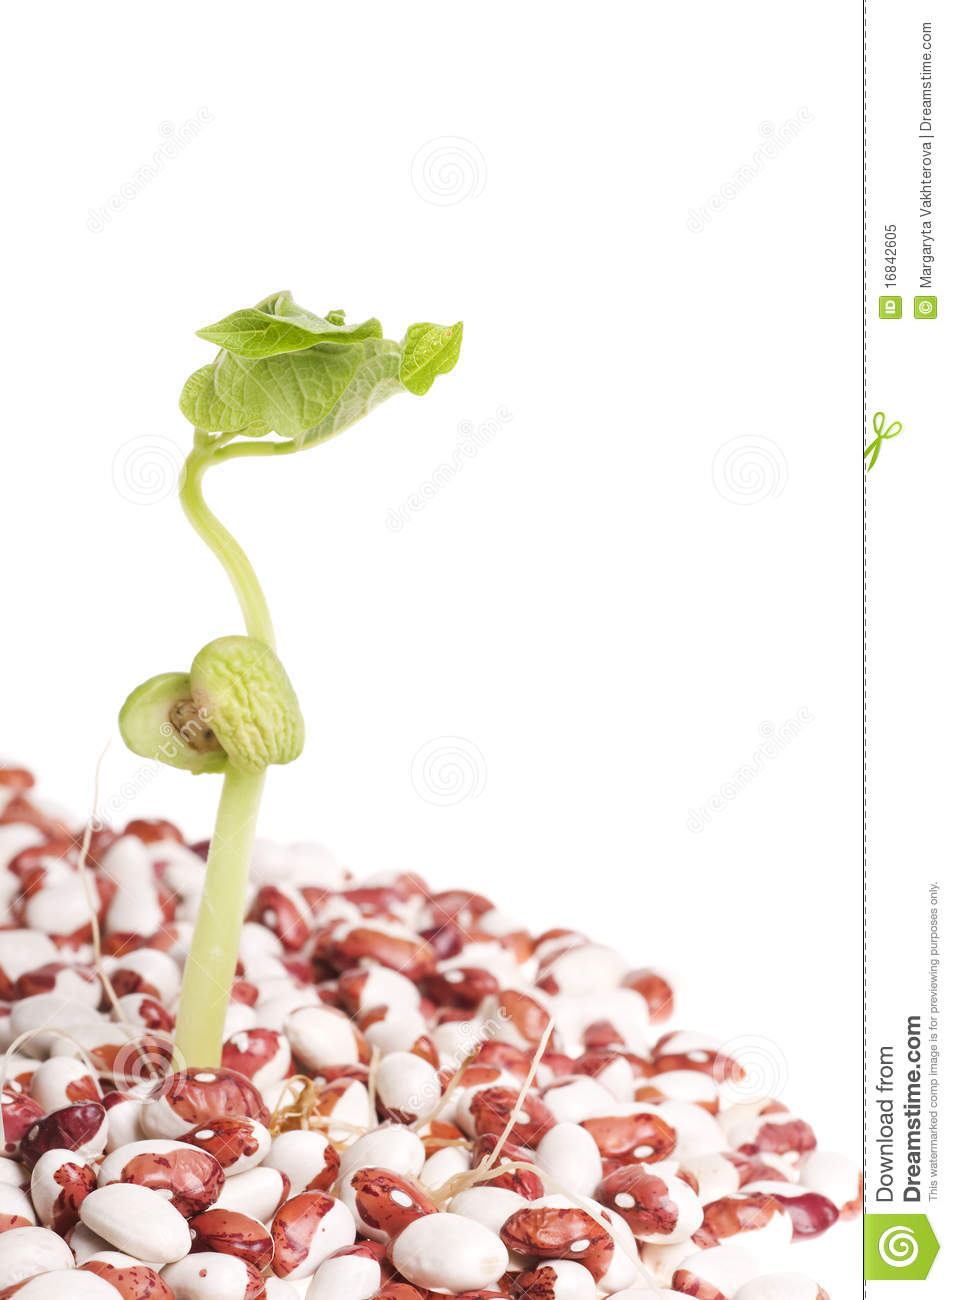 Green Fresh New Sprout Over Haricot Multicolored Beans